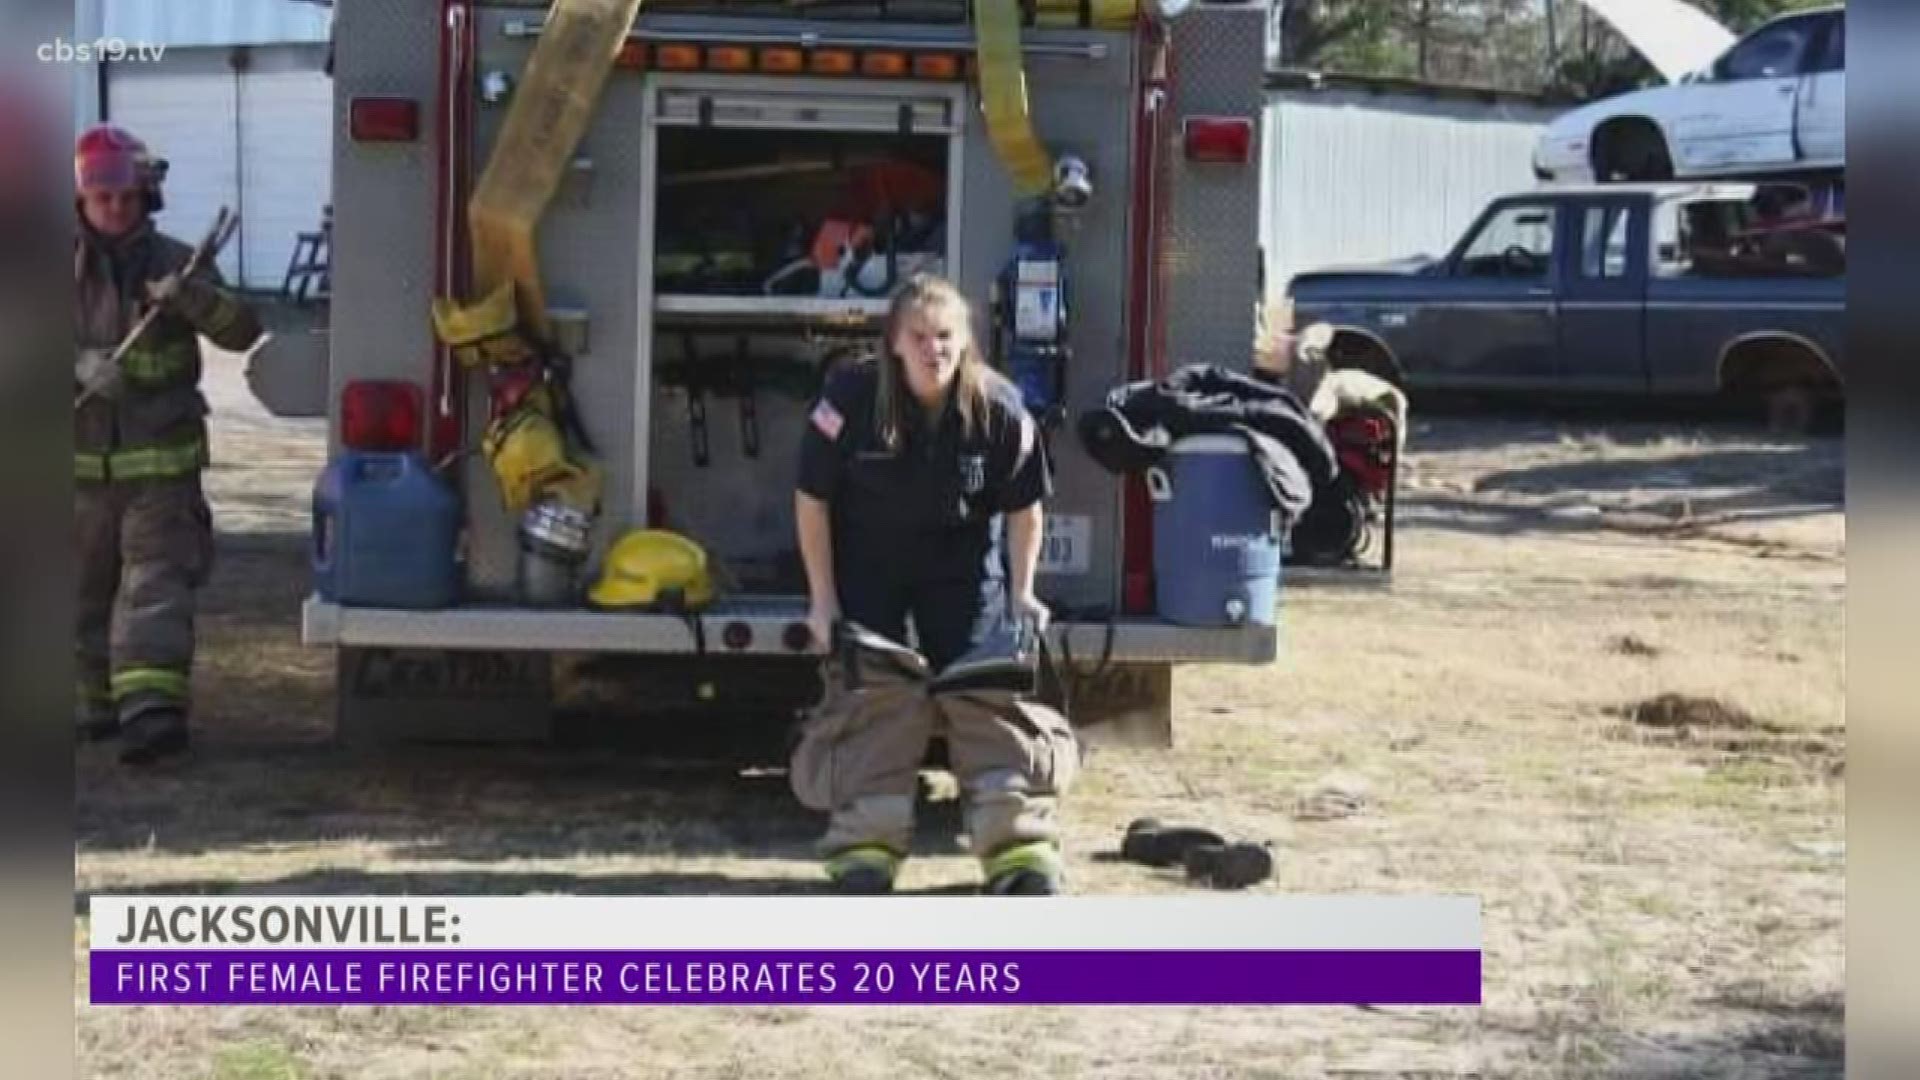 She joined the department as the first female firefighters in Jacksonville's history.